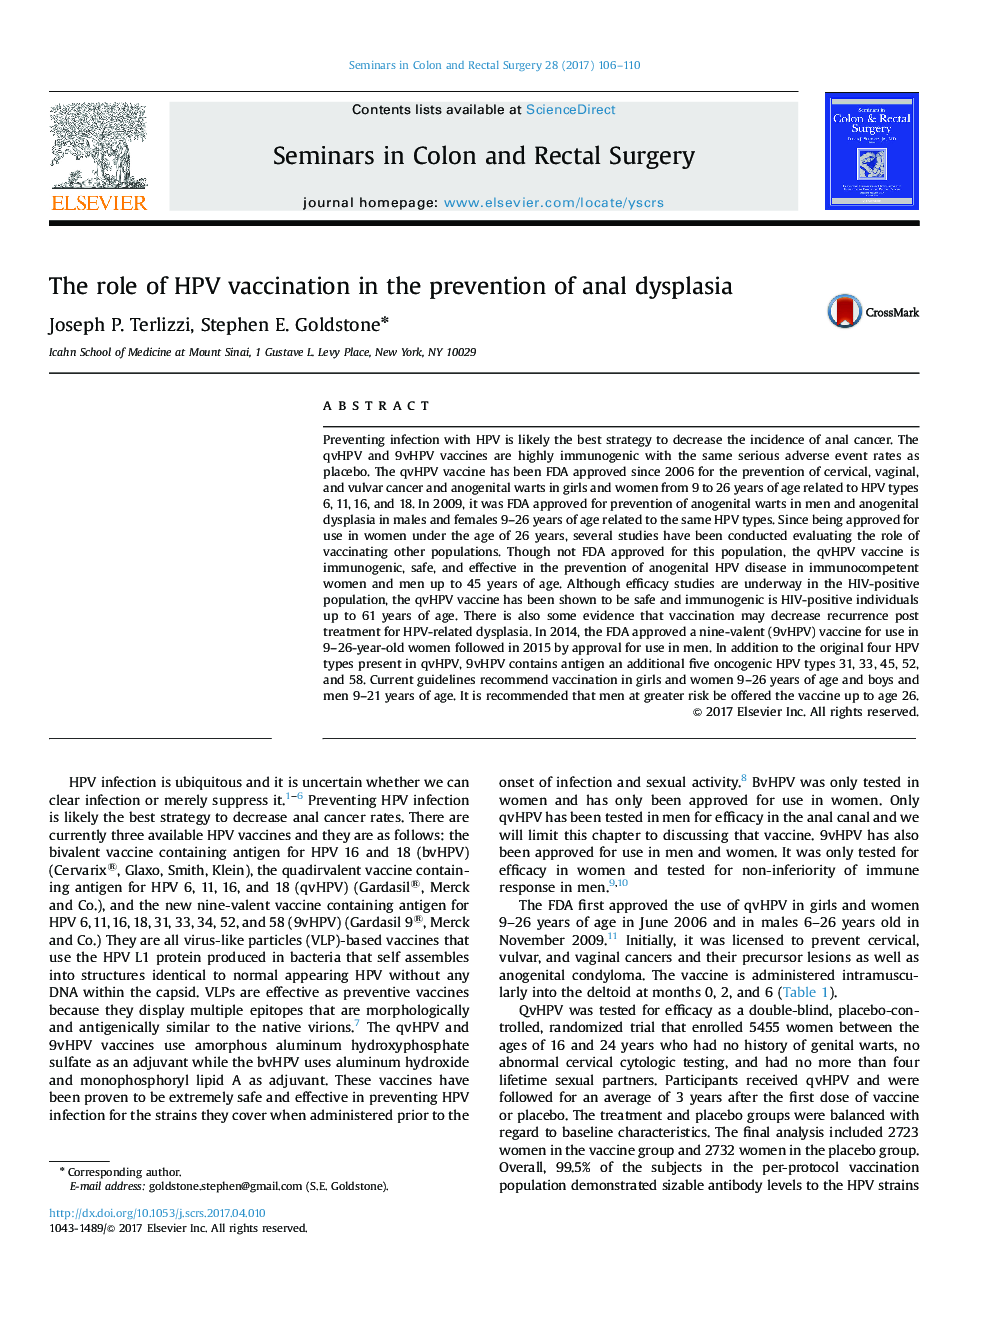 The role of HPV vaccination in the prevention of anal dysplasia